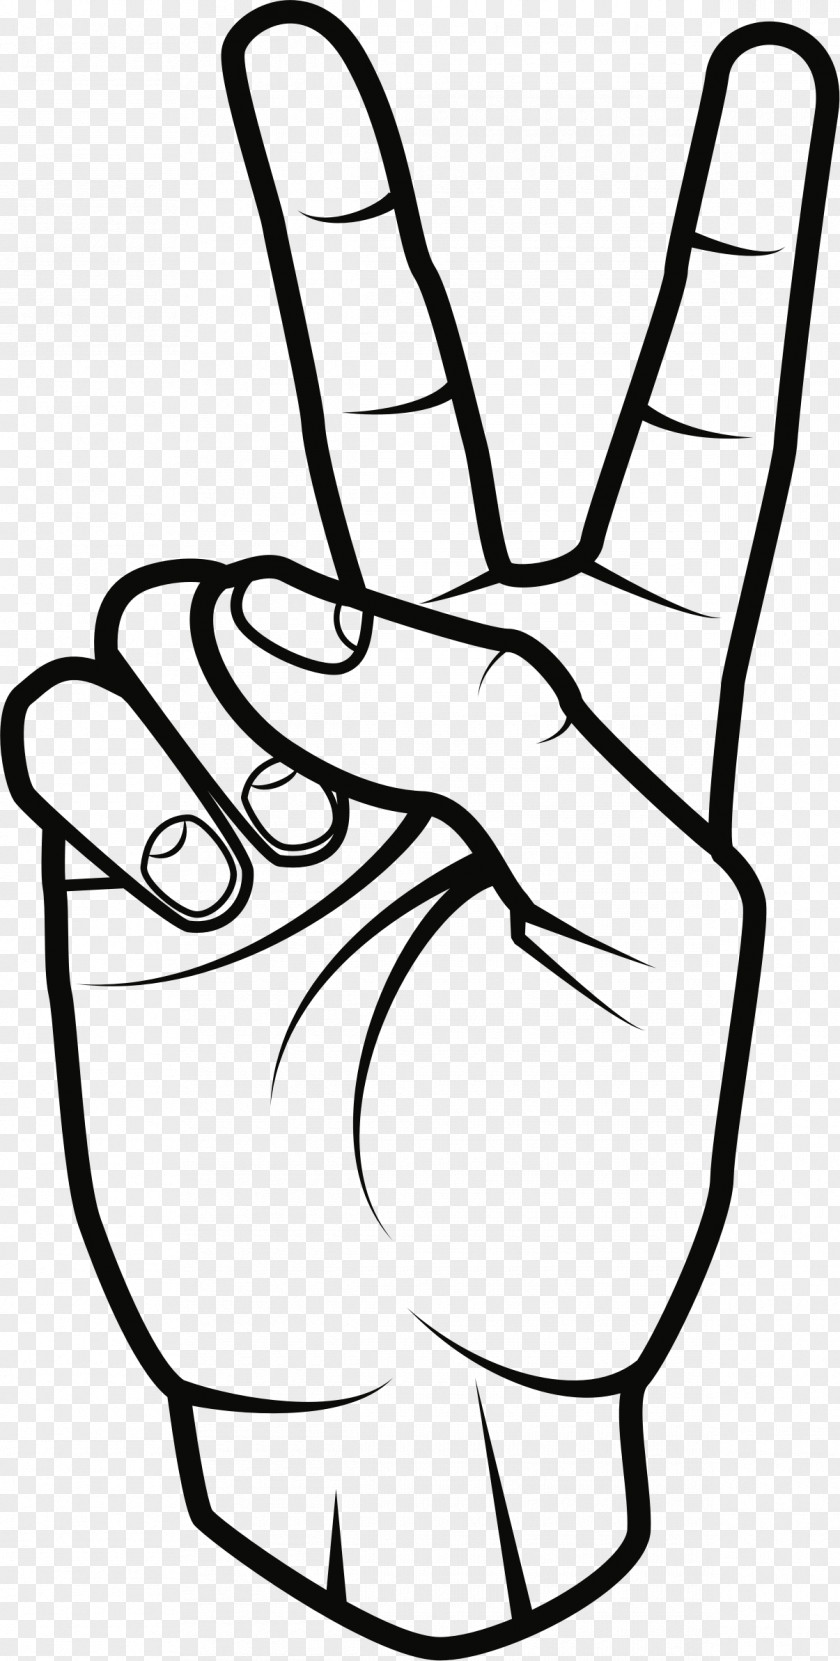 Hand V Sign Vector Graphics Clip Art Of The Horns PNG